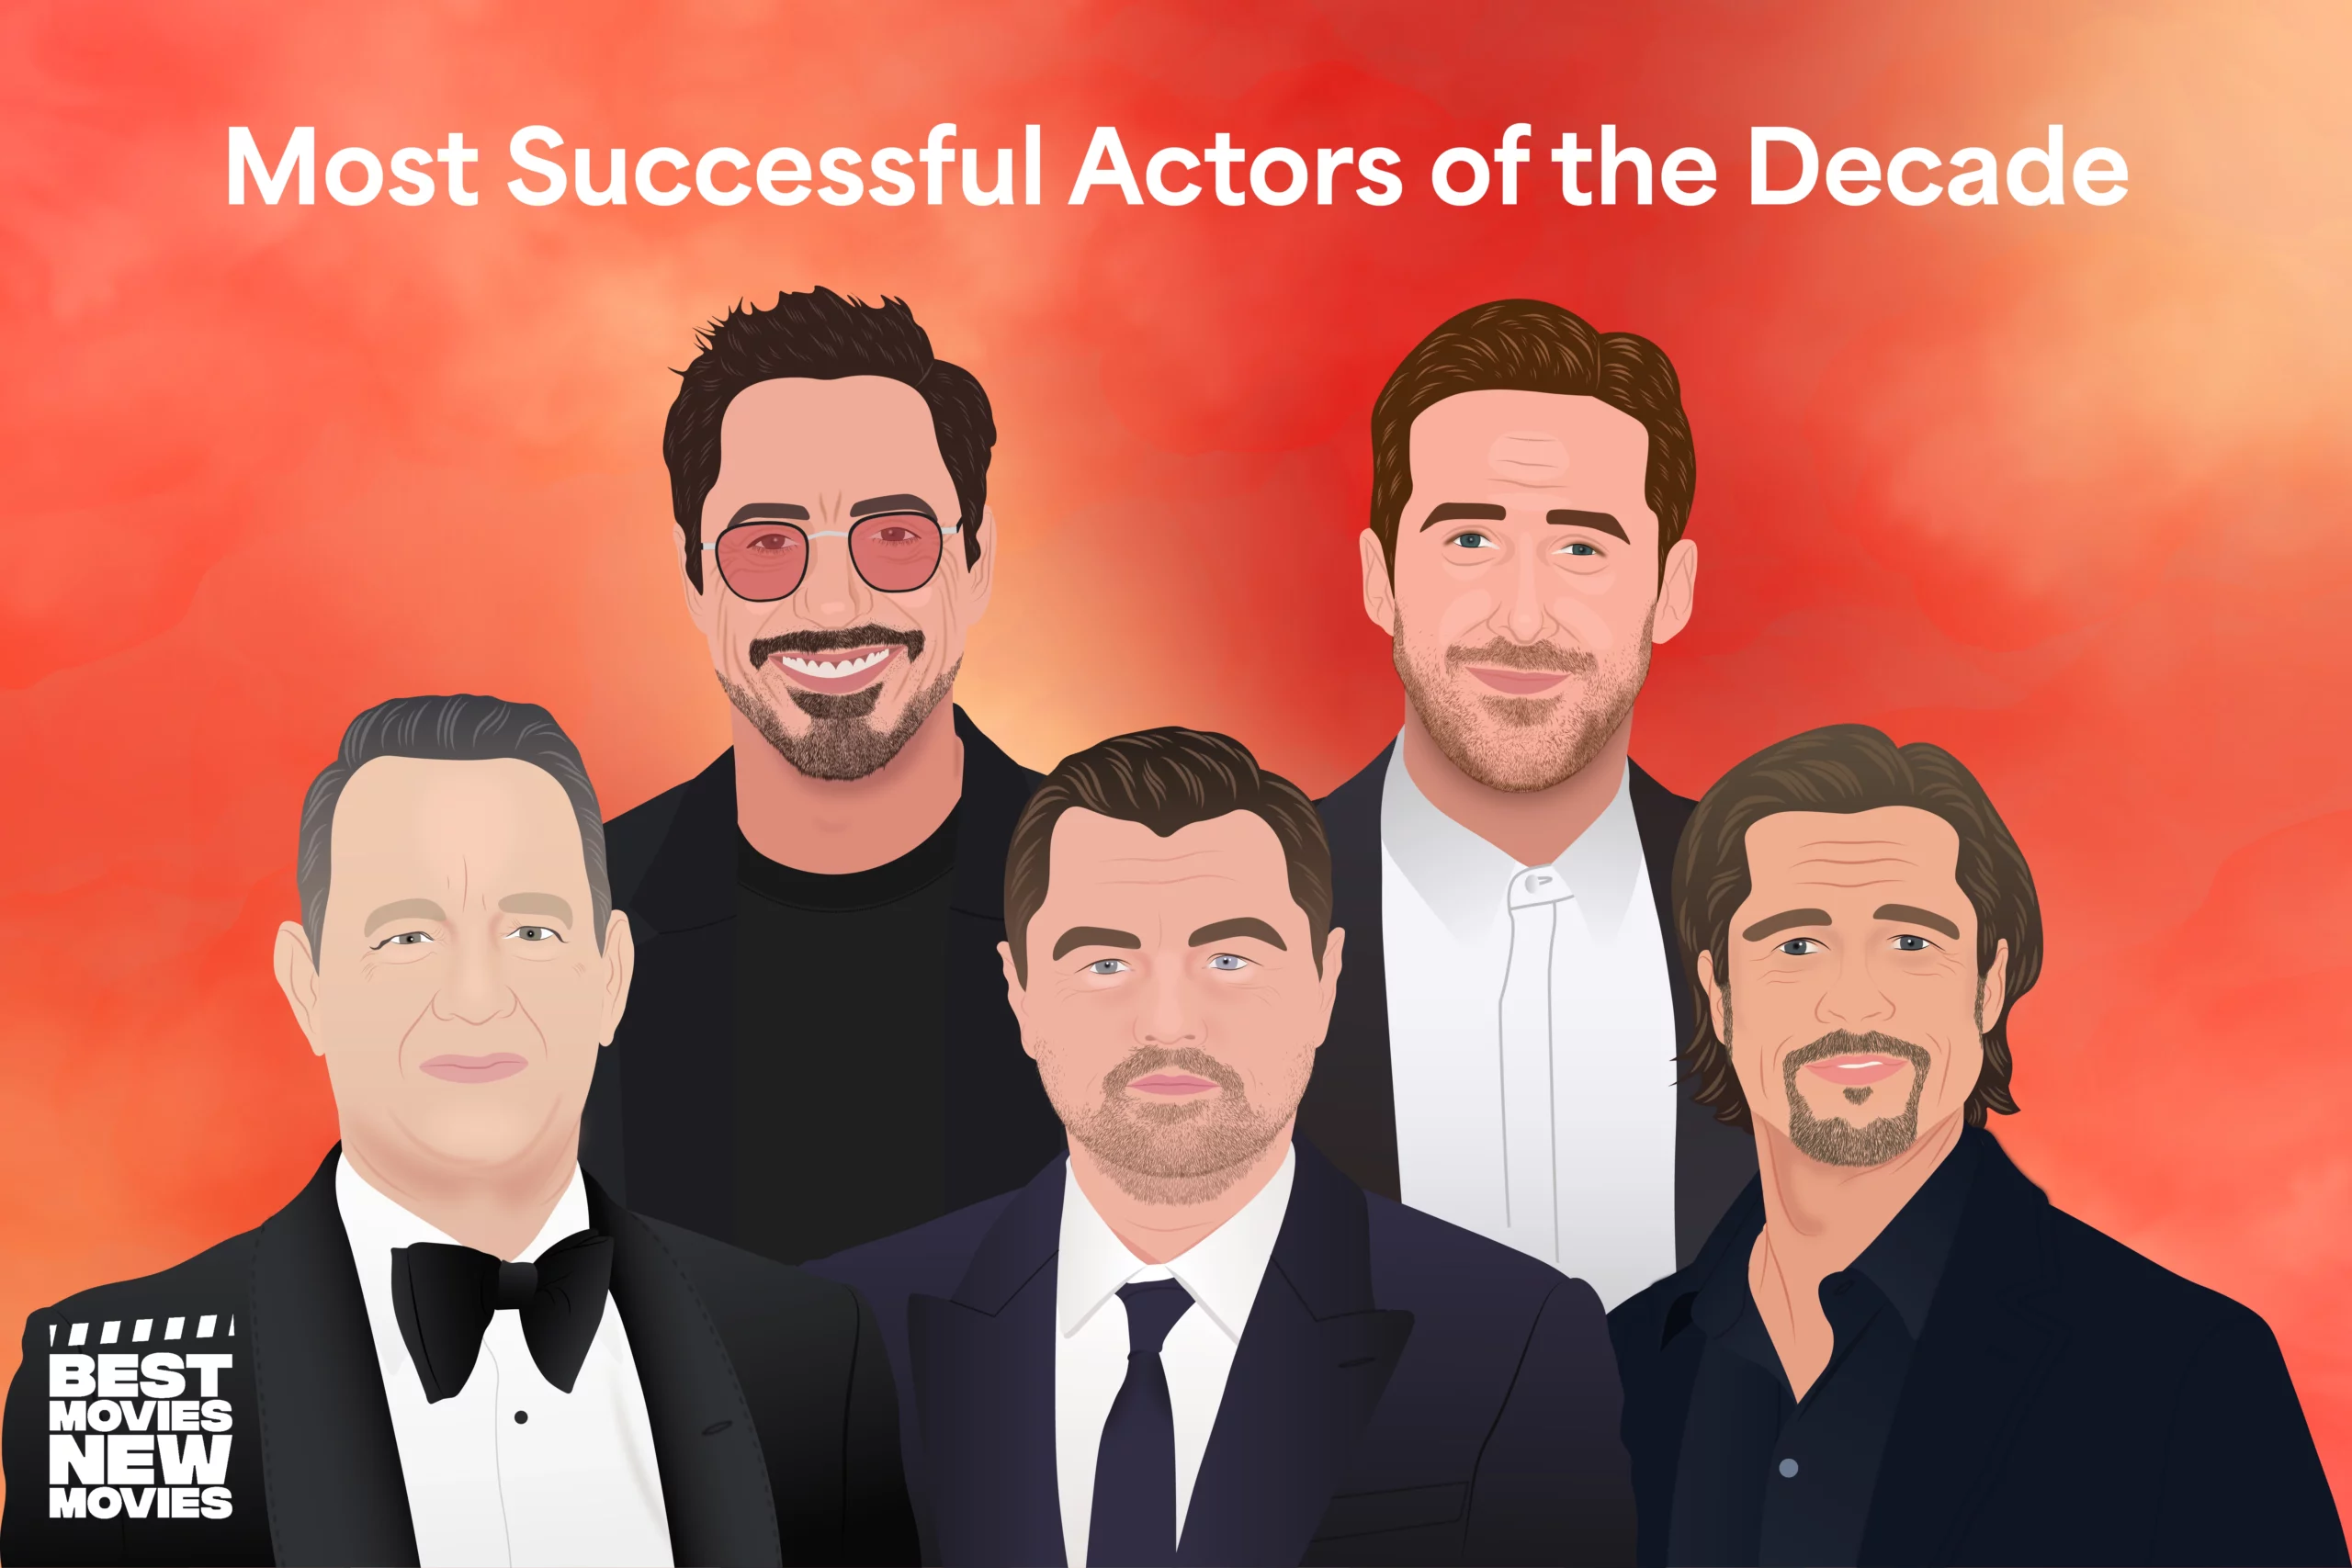 Most Successful Actors of the Decade